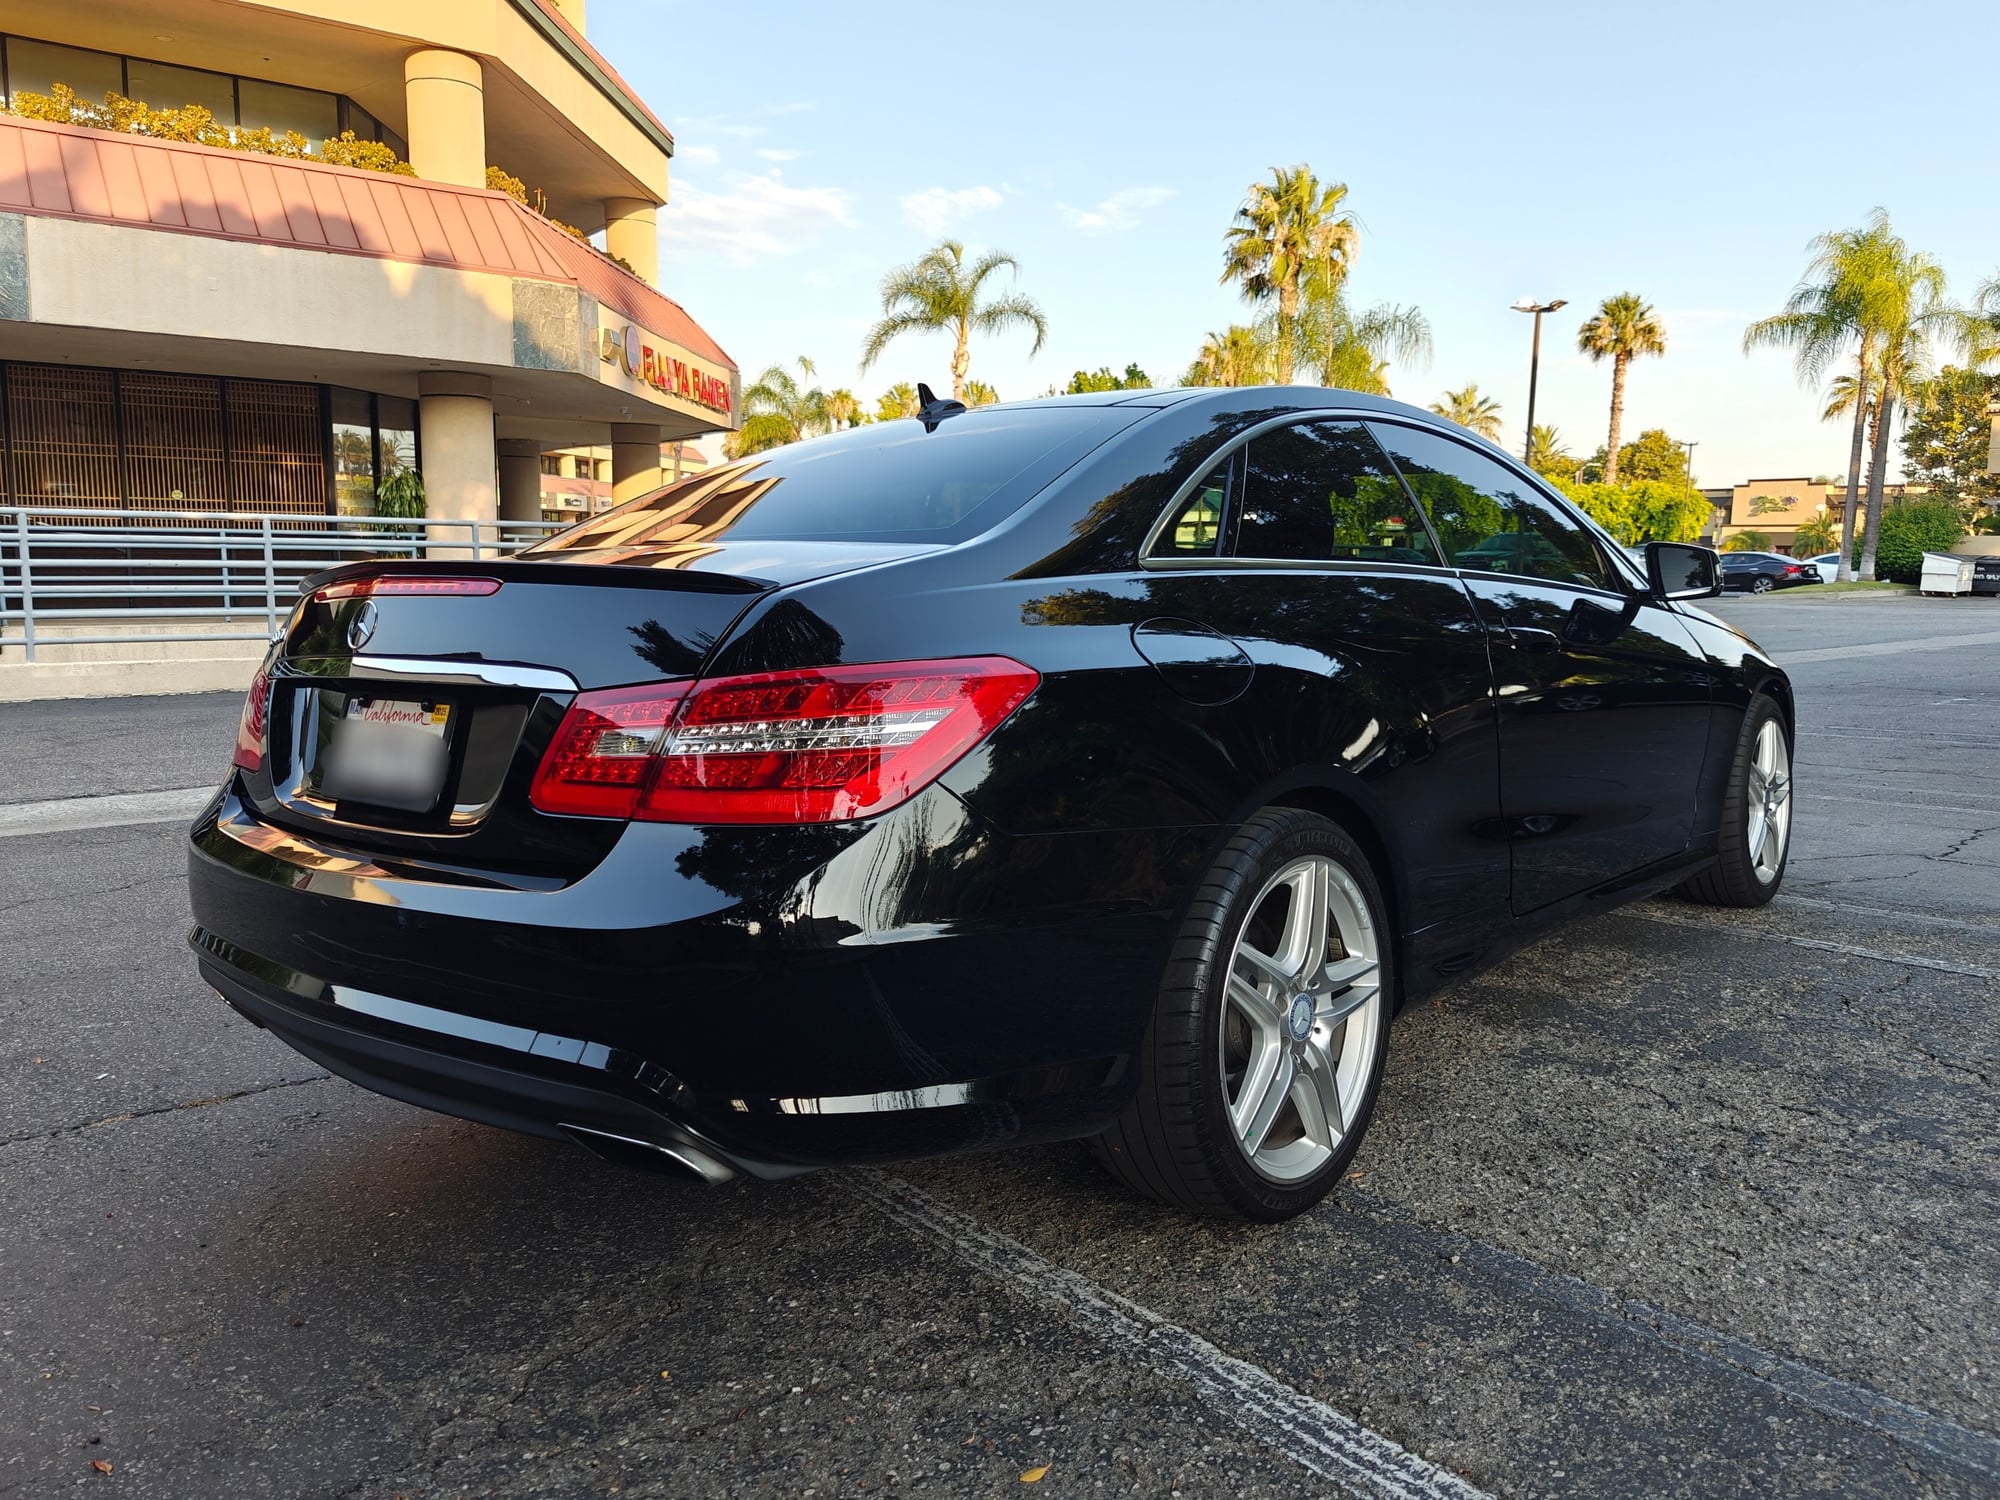 2012 Mercedes-Benz E550 - 2012 MB E550 Coupe - Great Options w/ OEM+ Upgrades - Used - VIN WDDKJ7DB8CF154411 - 114,700 Miles - 8 cyl - 2WD - Automatic - Coupe - Black - Los Angeles, CA 90015, United States